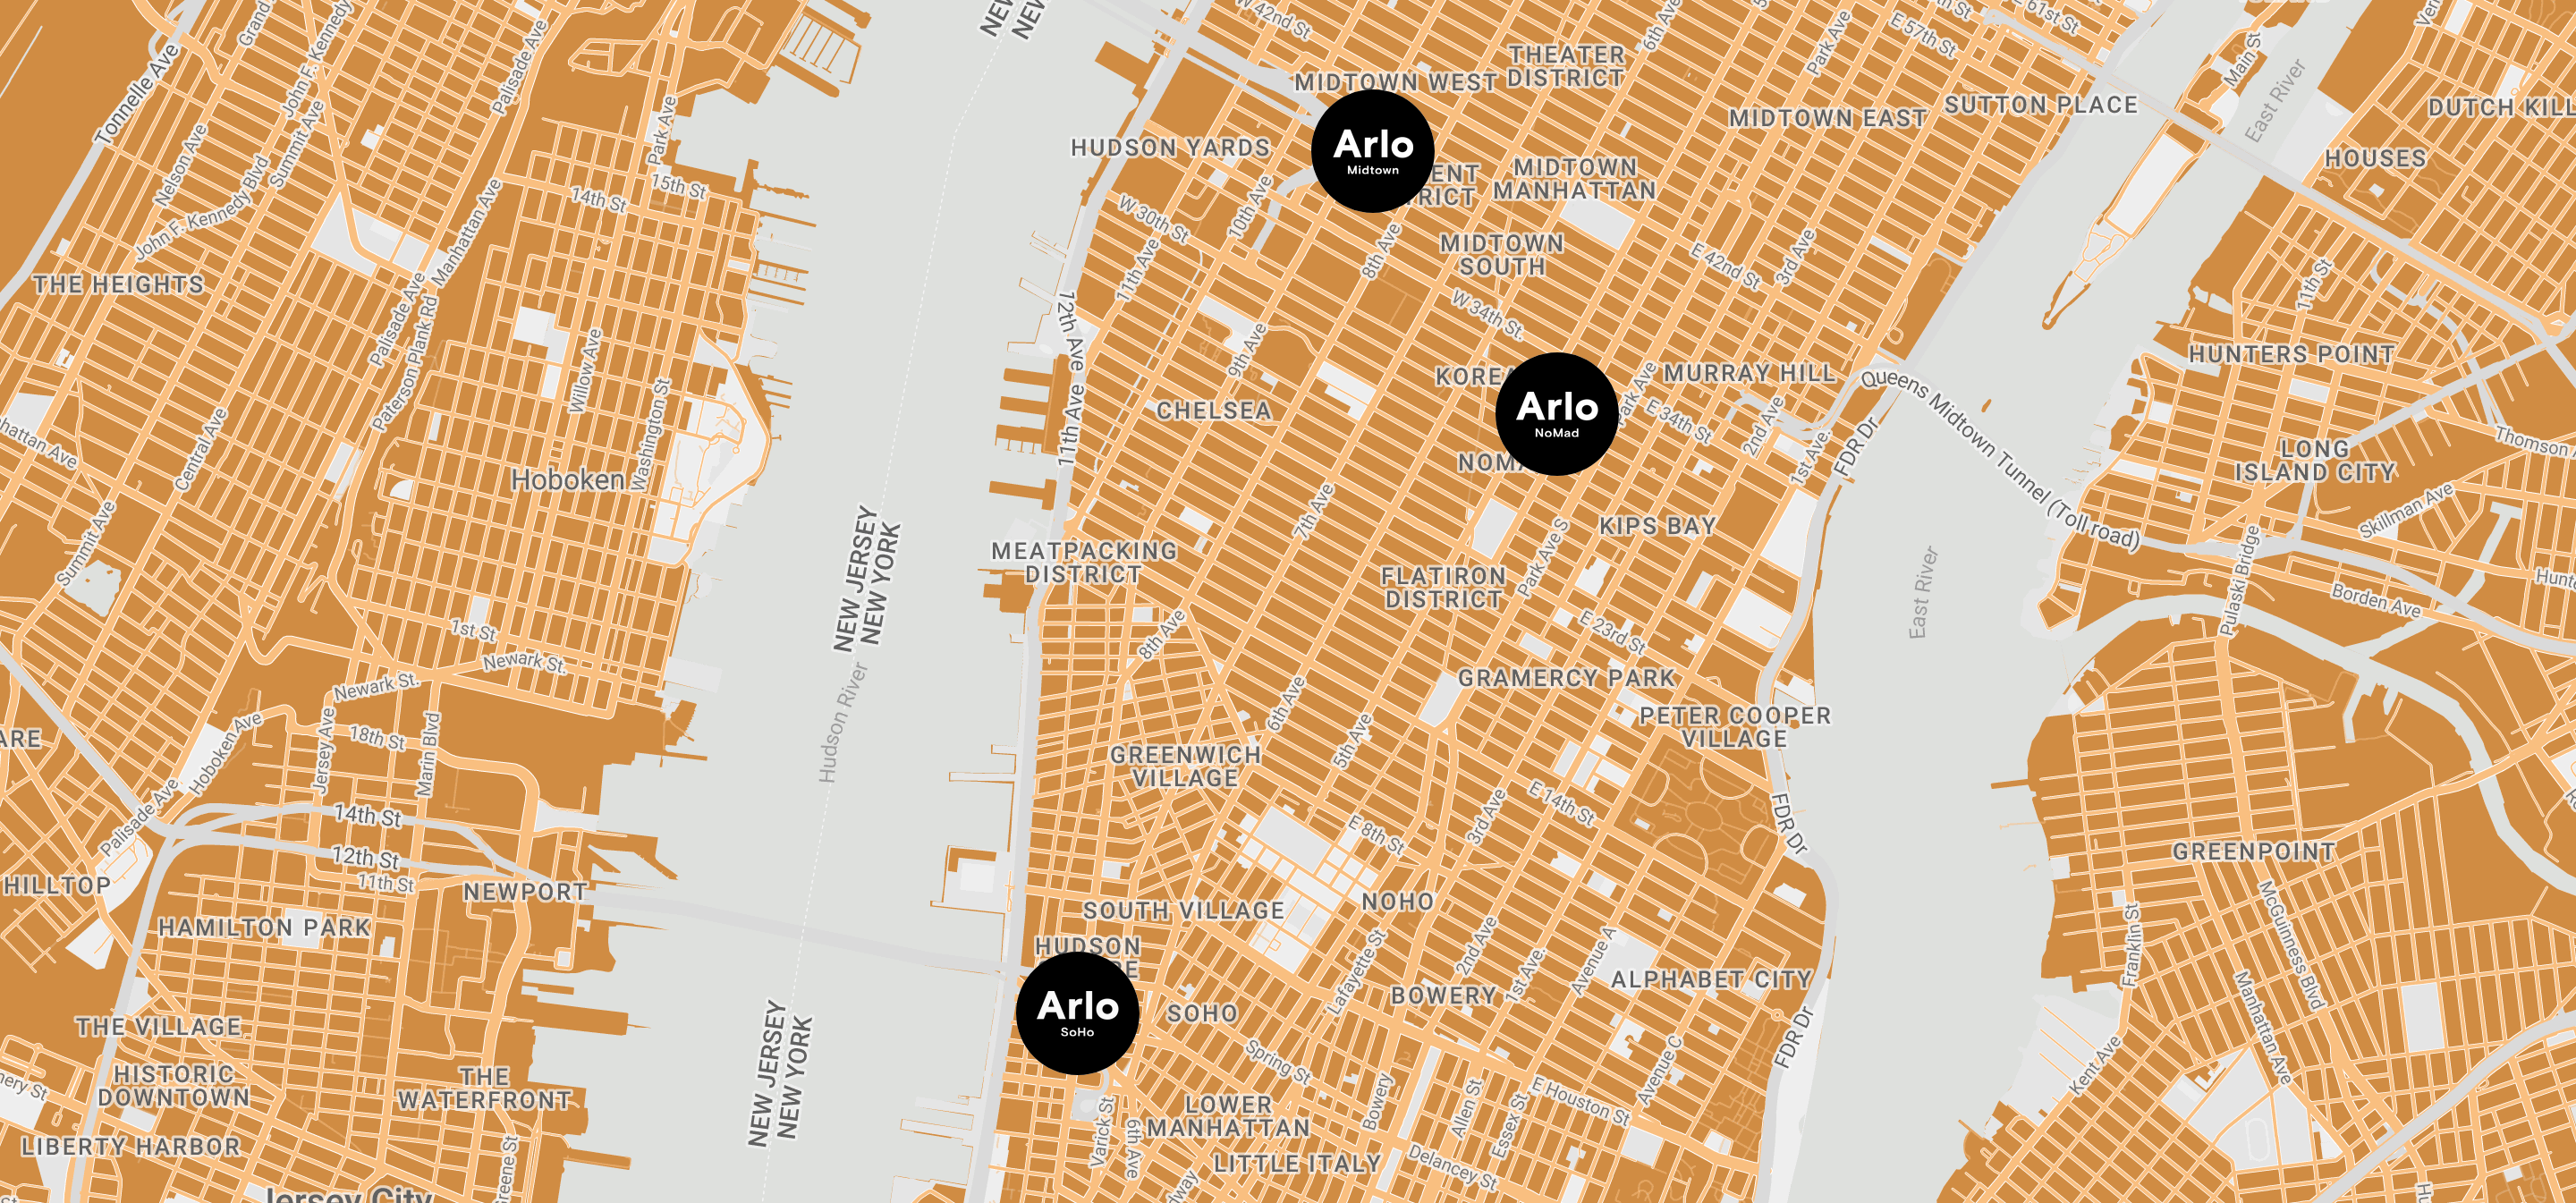 Map view of New York City with locations of Arlo Midtown at 351 West 38th Street, Arlo Nomad at 11 East 31st Street, and Arlo SoHo at 231 Hudson Street